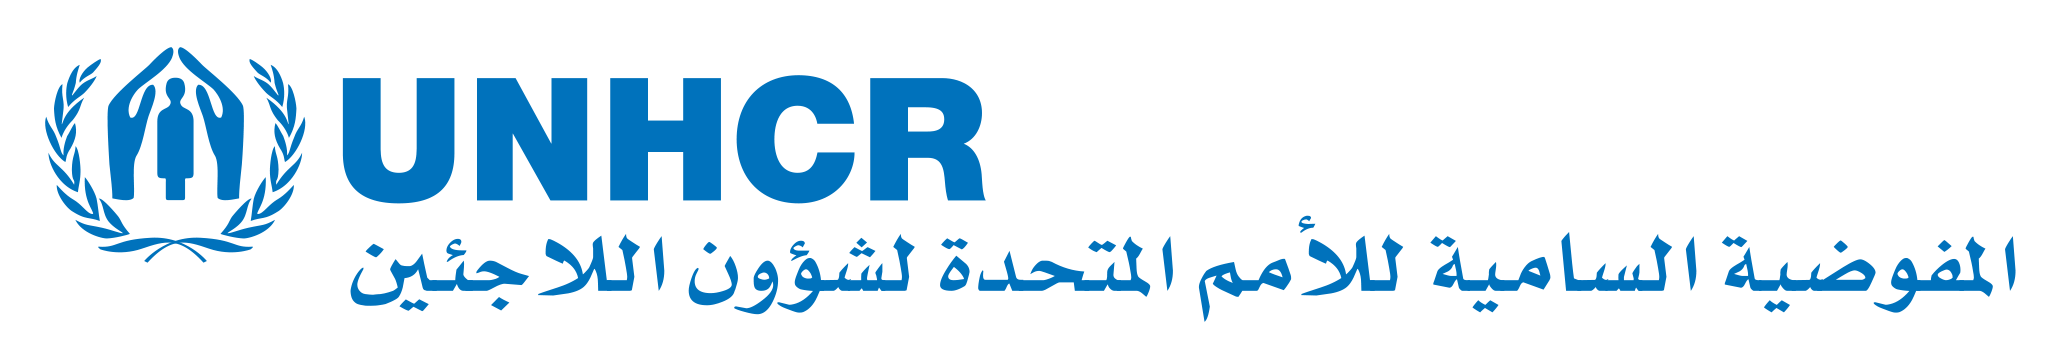 logo-ar-cropped-2.png